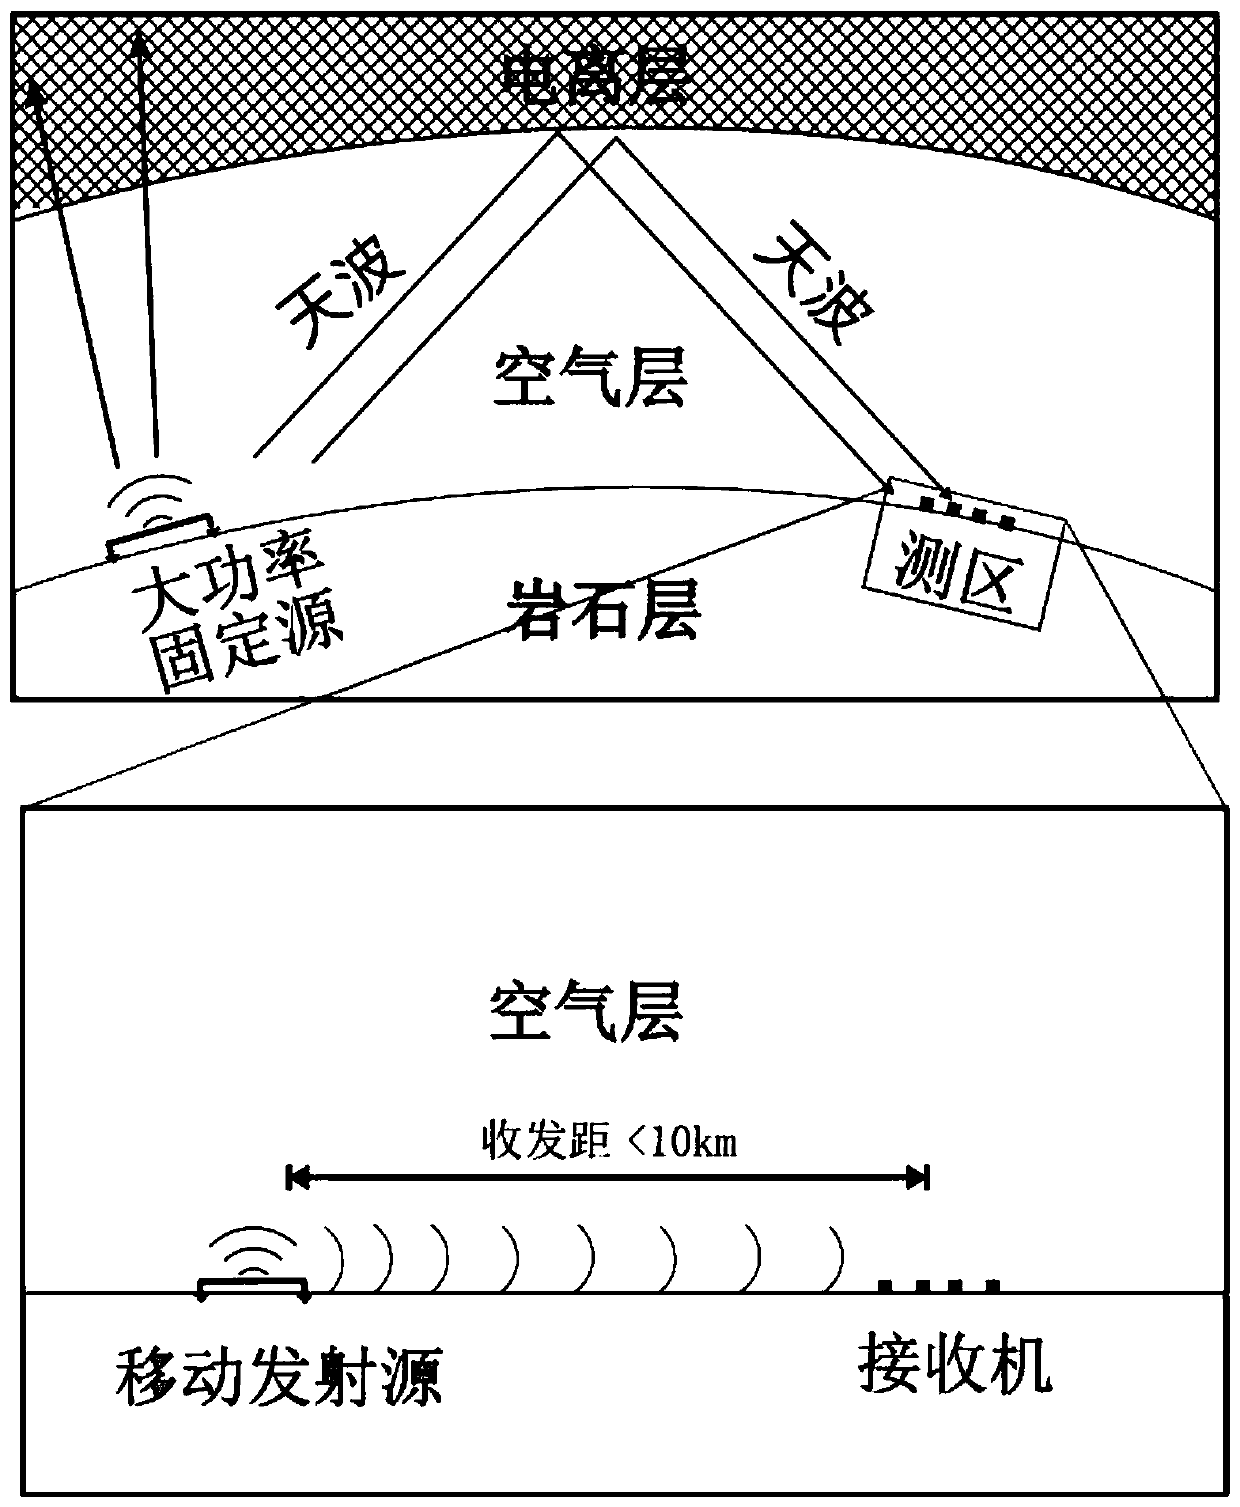 Deep resource electromagnetic detection method combining mobile source and fixed source